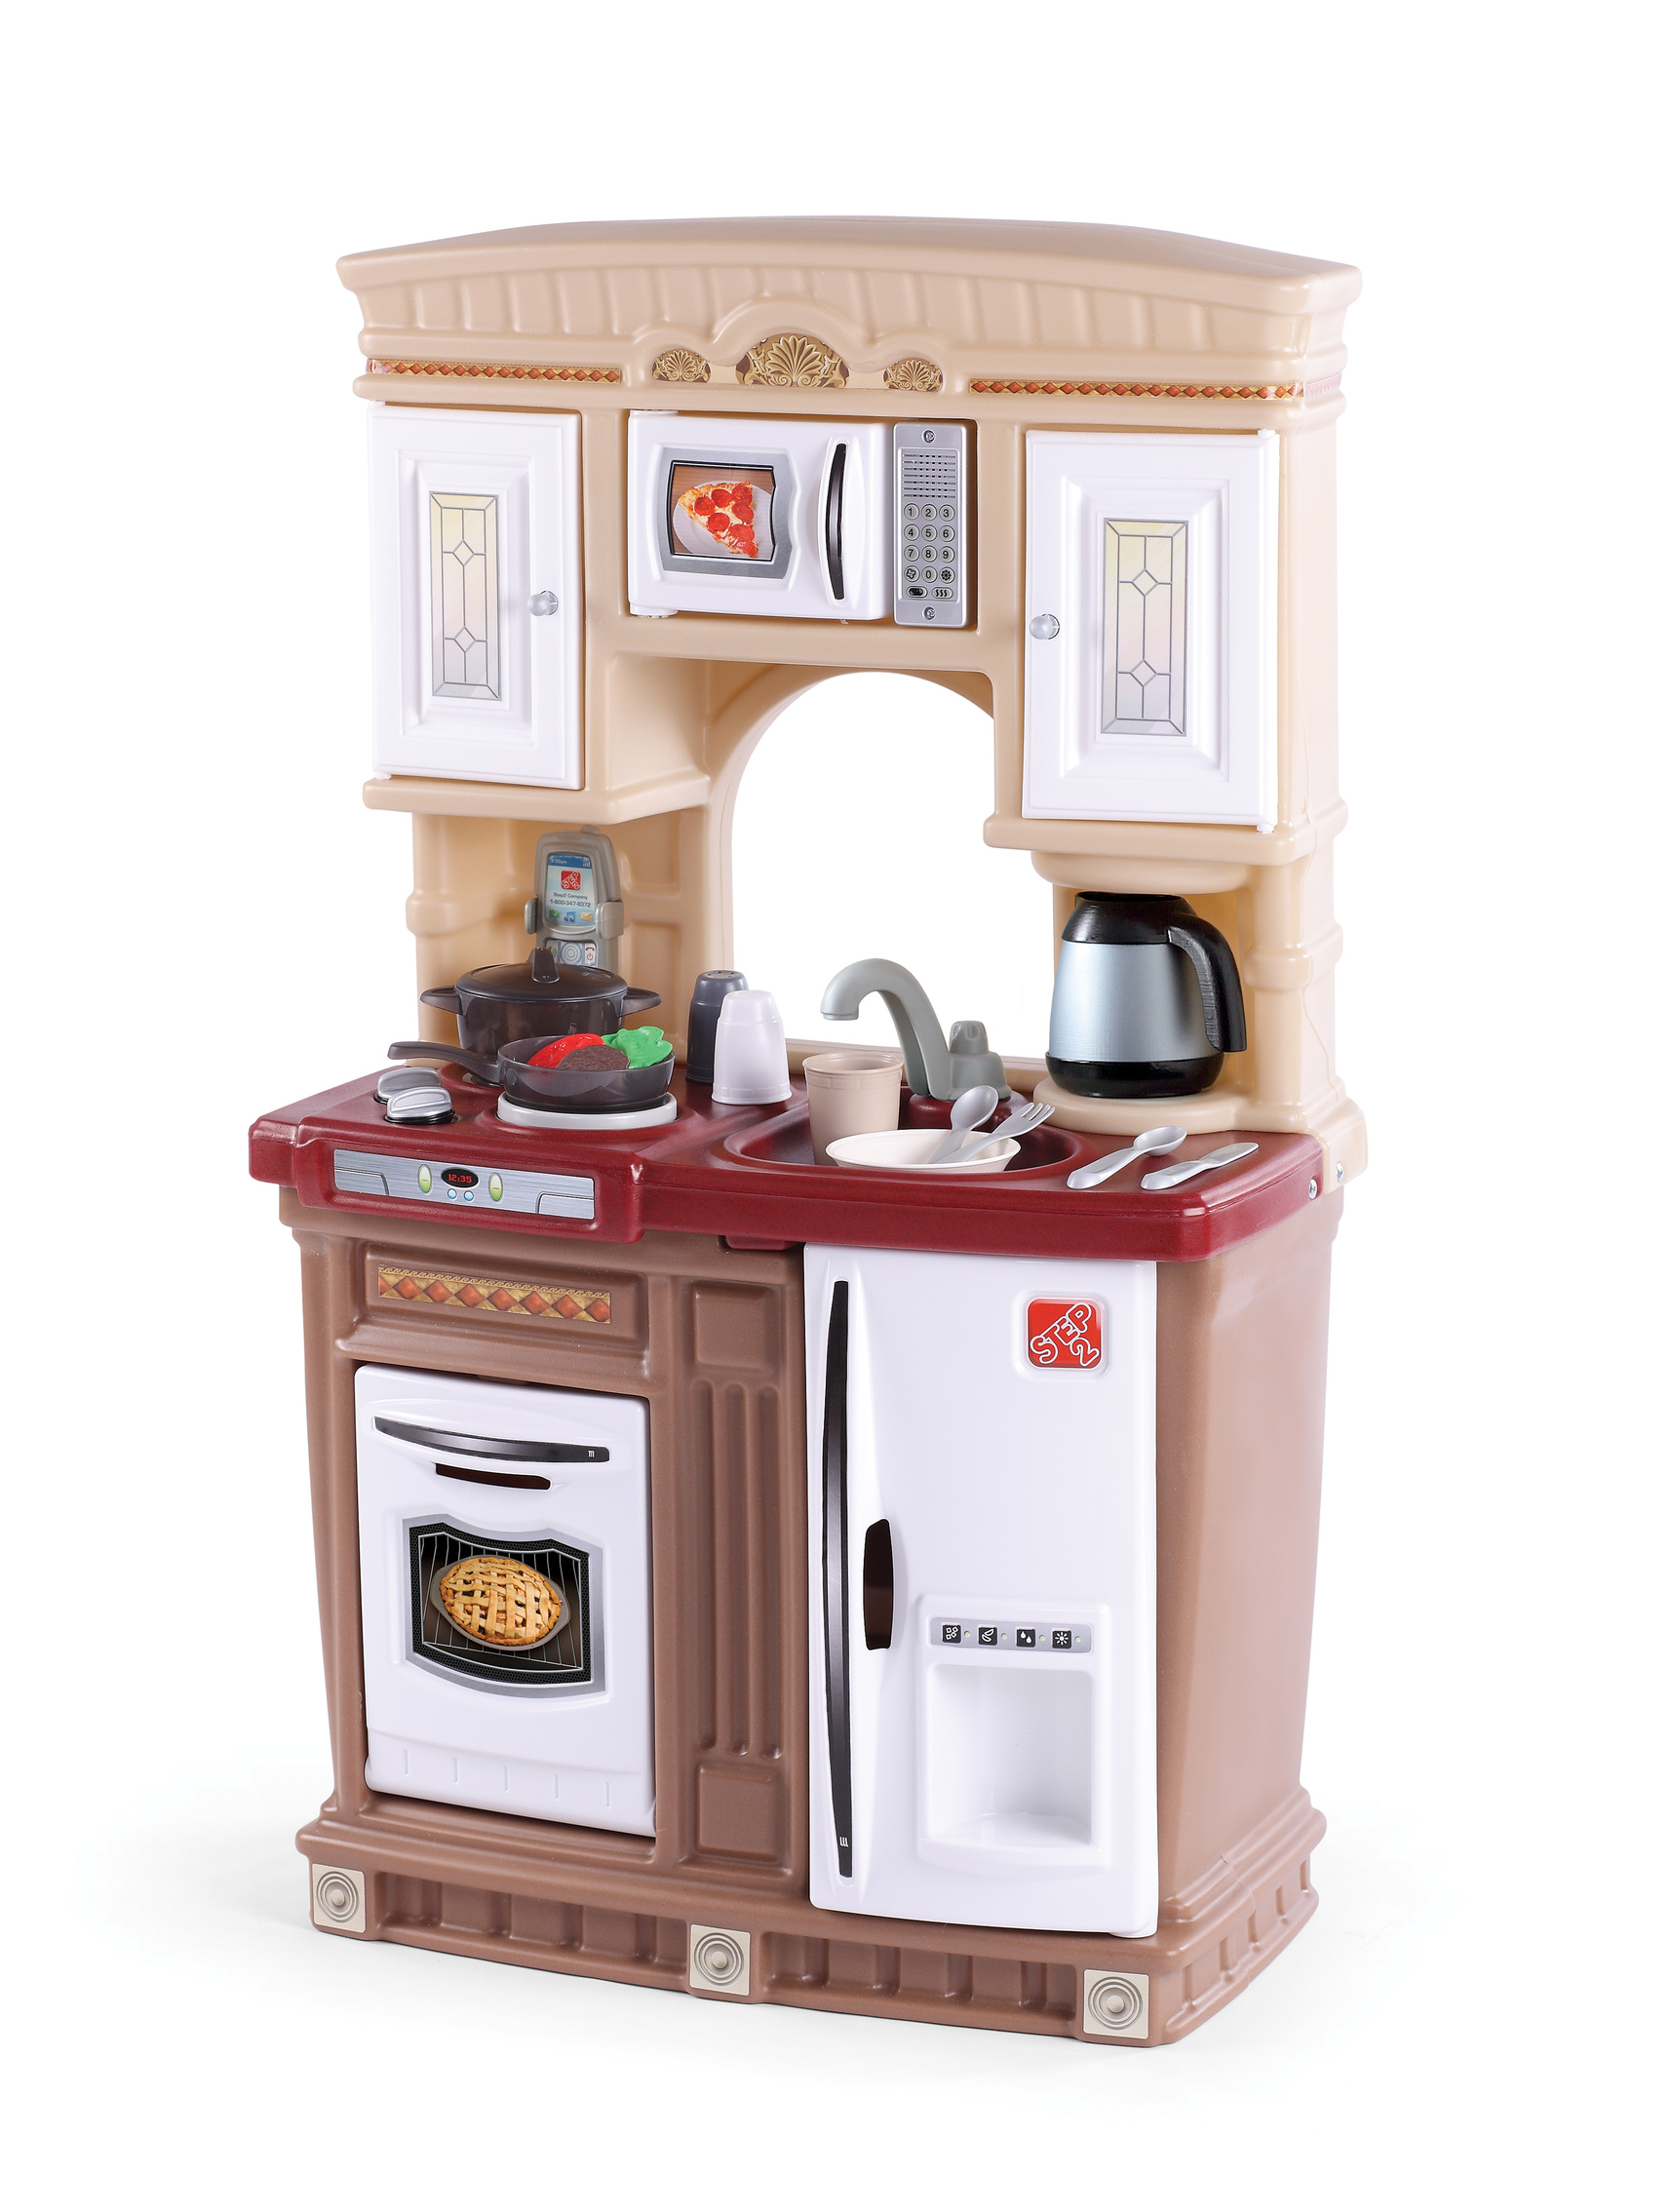 Step2 Lifestyle Fresh Accents Brown Toddler Plastic Kitchen with 30 Piece Kitchen Play Set - image 4 of 5